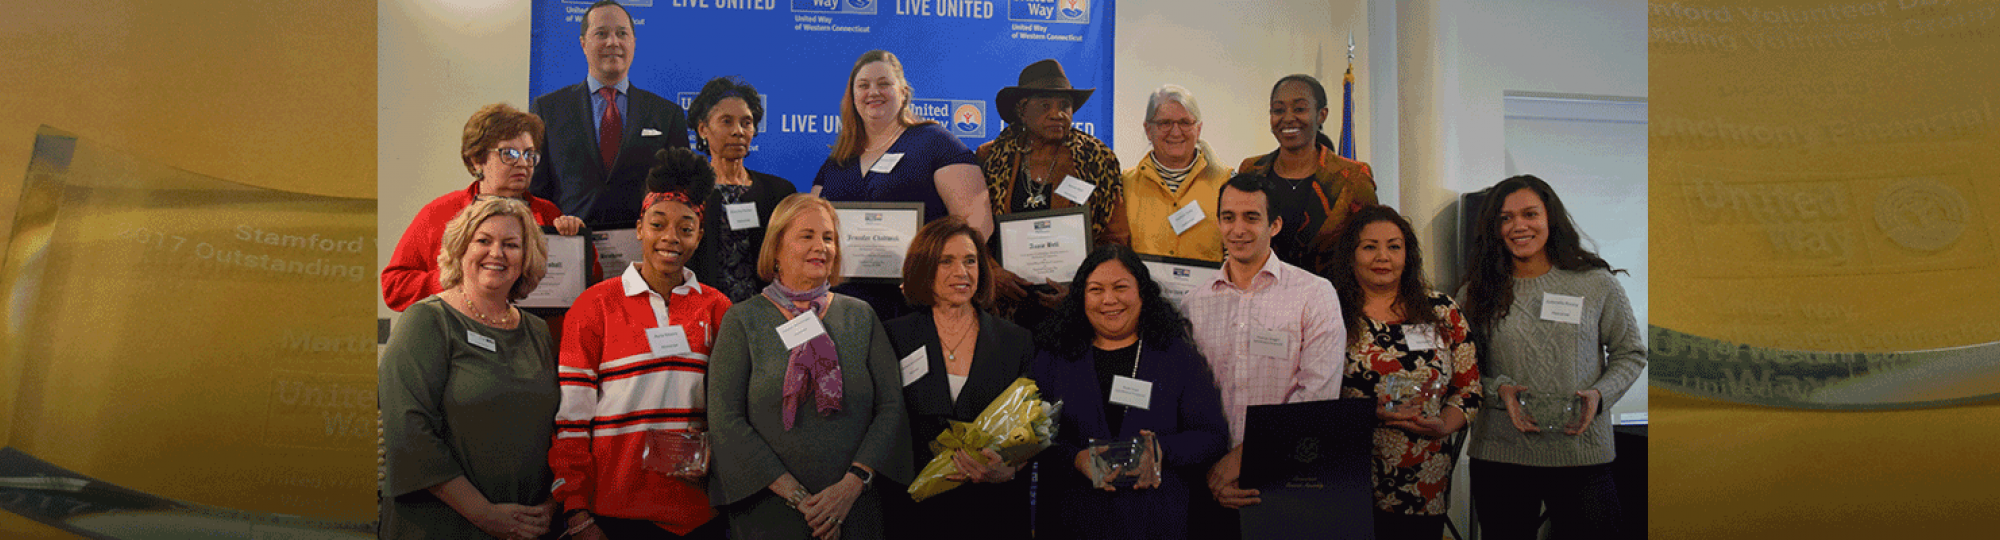 United Way celebrates Stamford residents who devote their time to volunteerism for the benefit of the Stamford community at the Stamford Volunteer Day Awards.